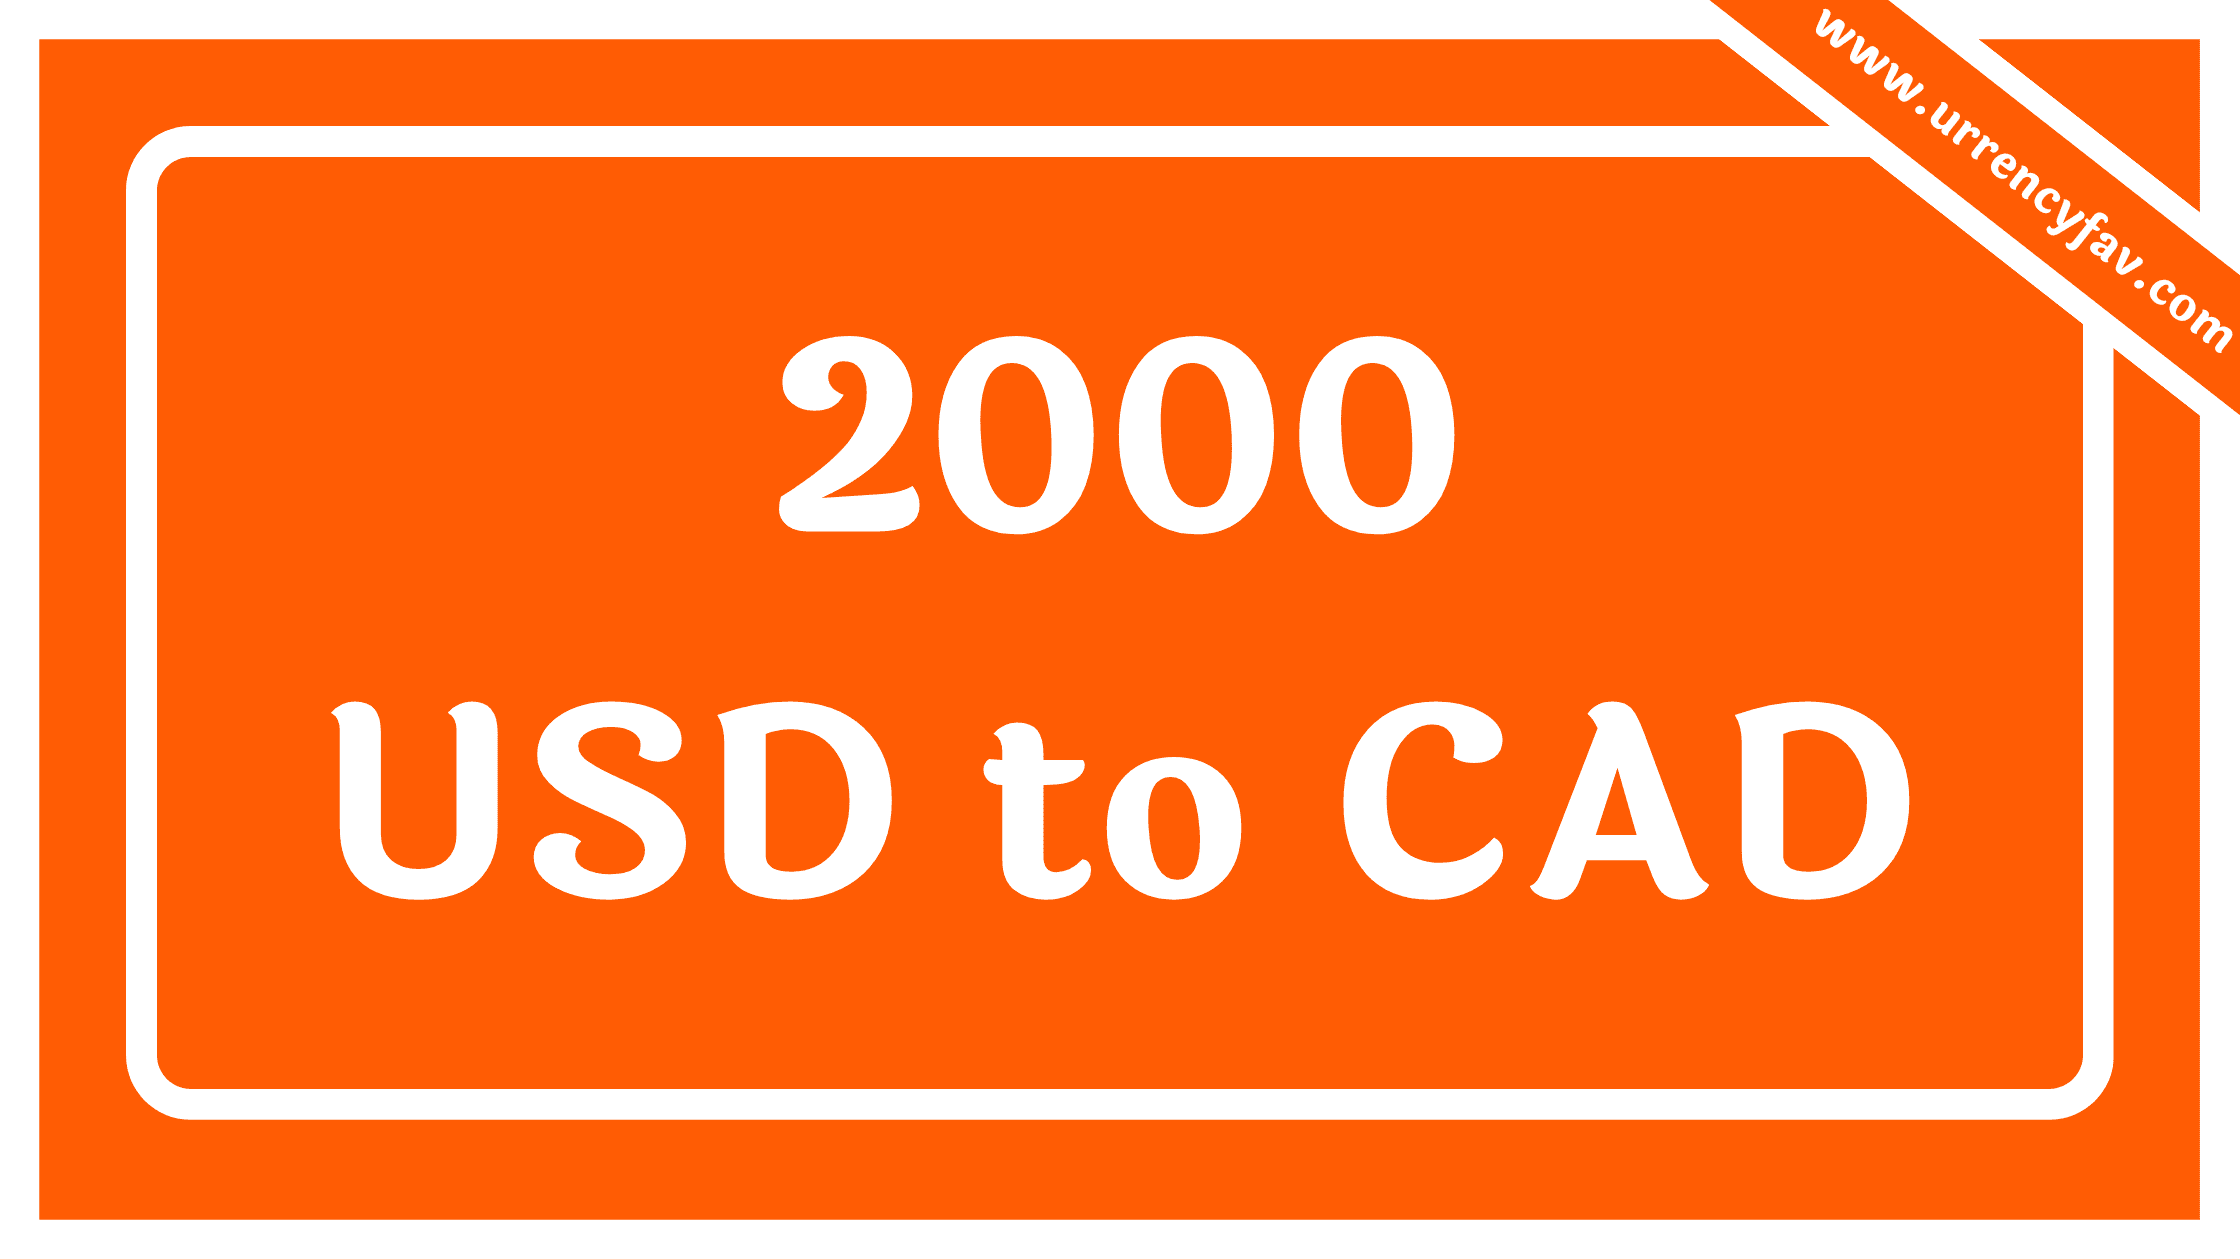 2000 USD to CAD